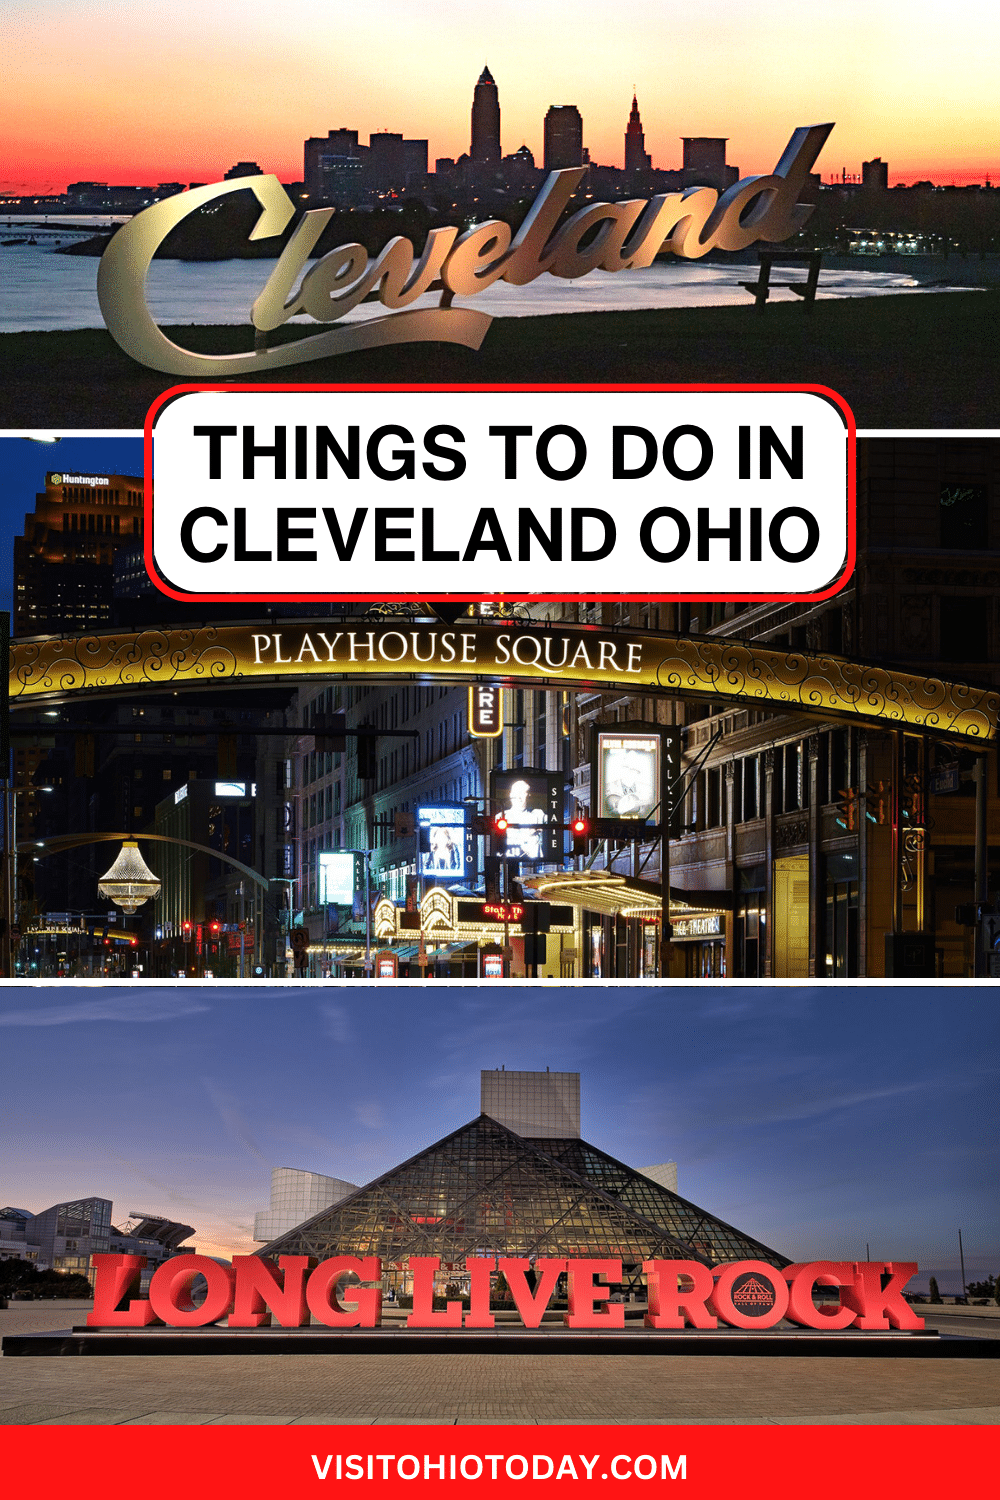 Cleveland Ohio is the second largest city in Ohio and it has something for everyone. It is a great city to visit at any time of the year. Here are some of our favorite things to do in Cleveland Ohio.